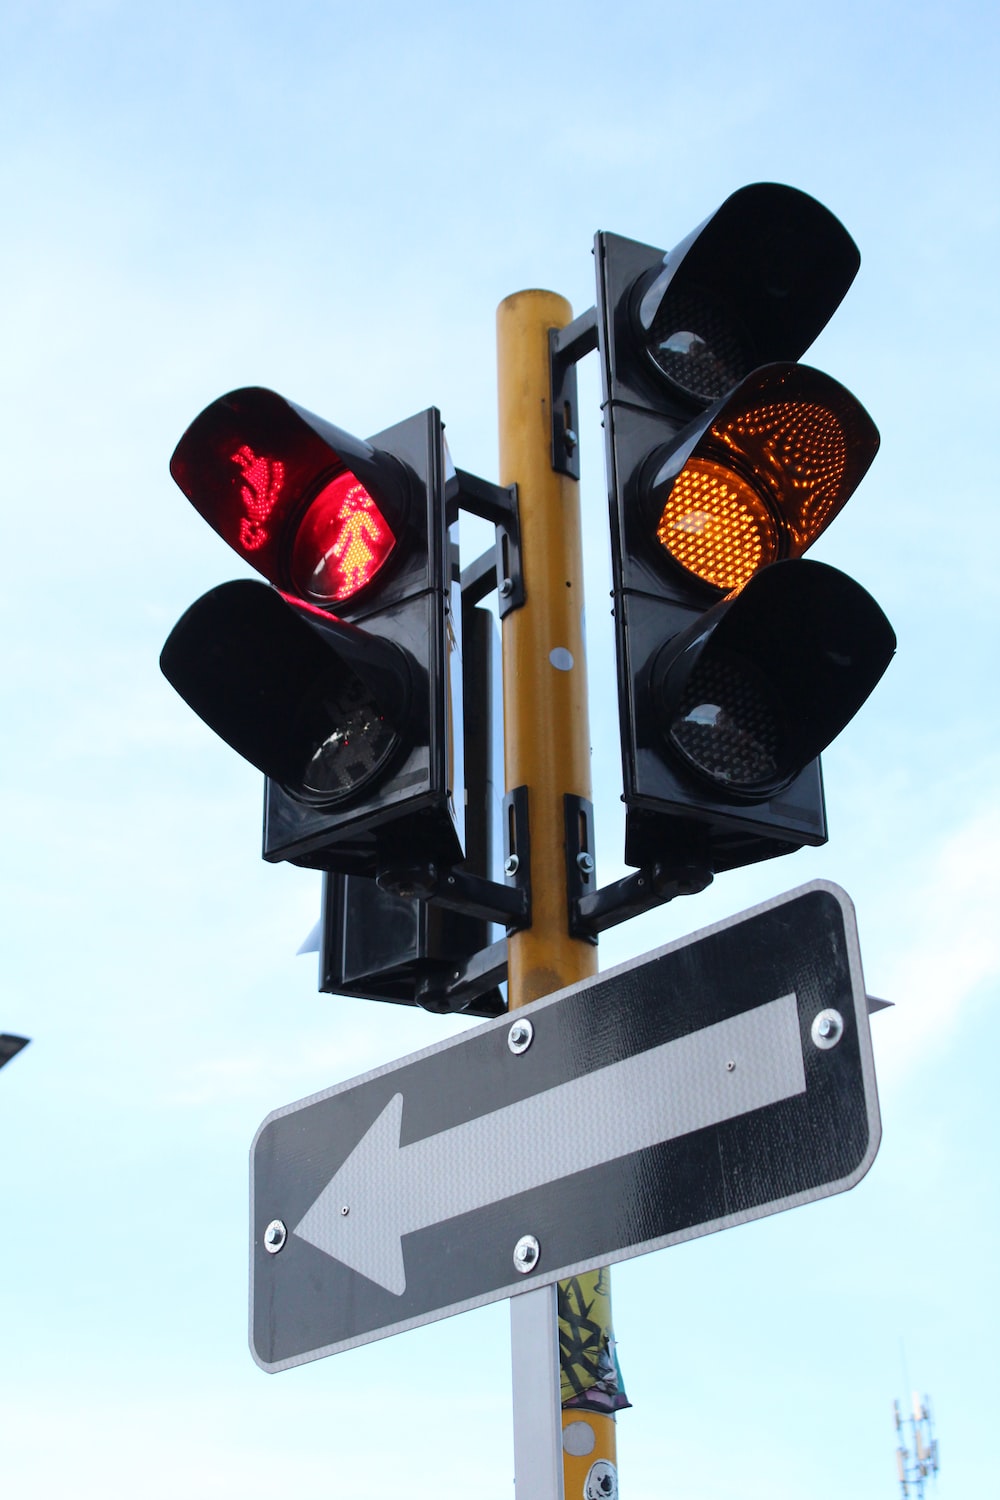 Traffic Signal Picture. Download Free Image